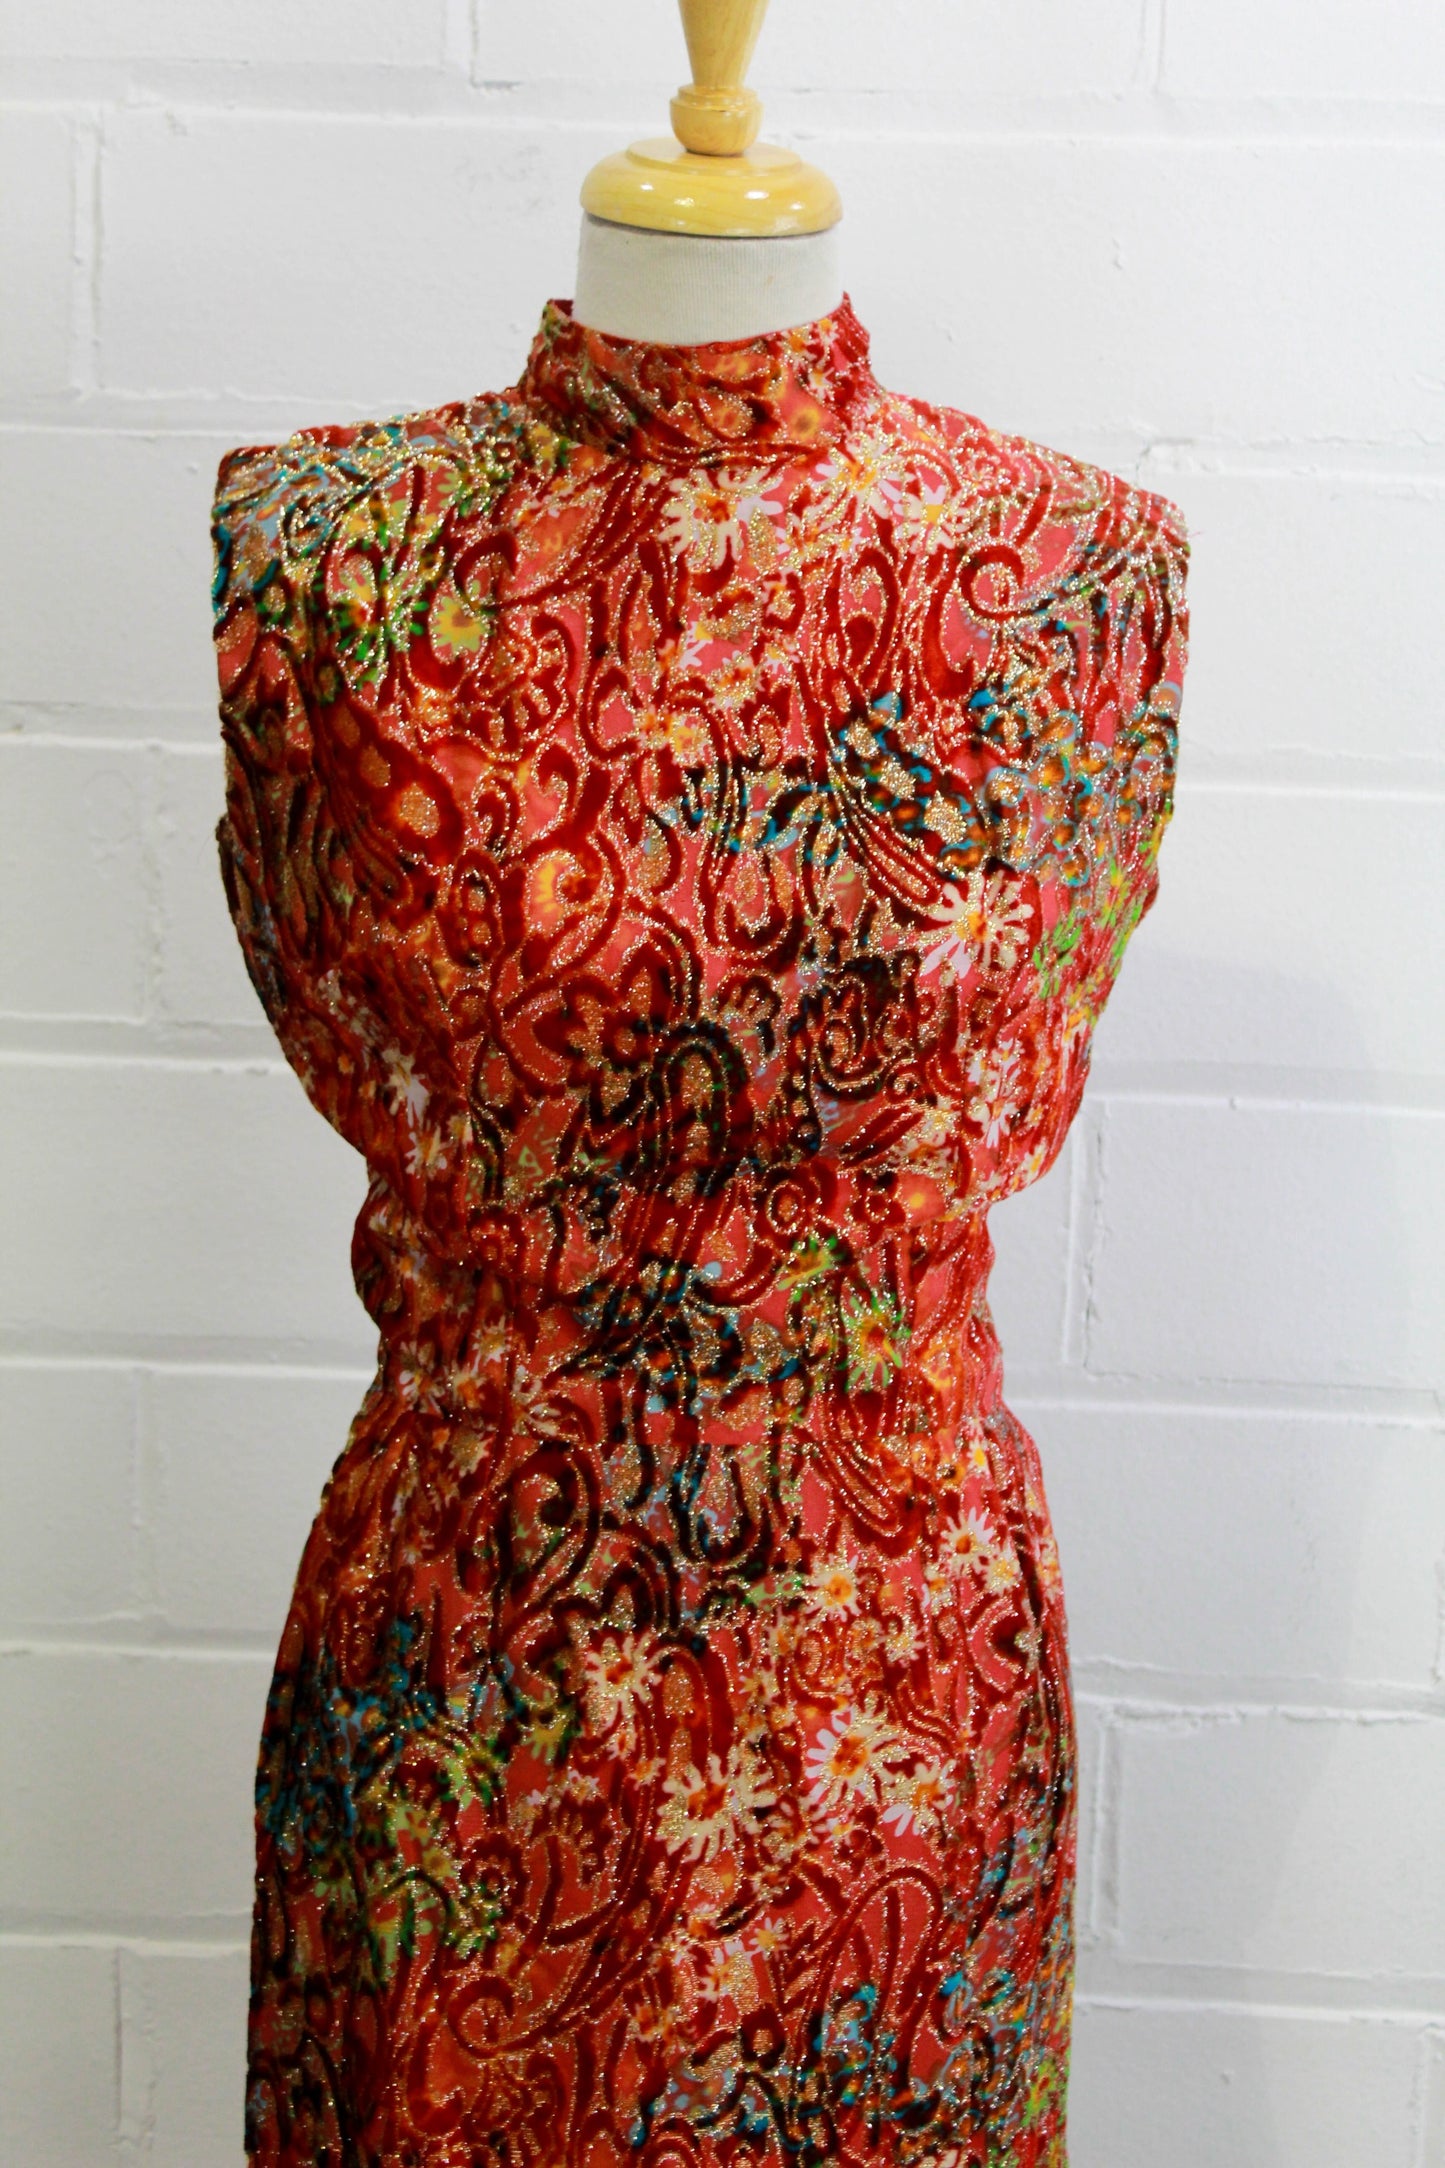 70s maxi dress red and gold velvet metallic floral print close up of front